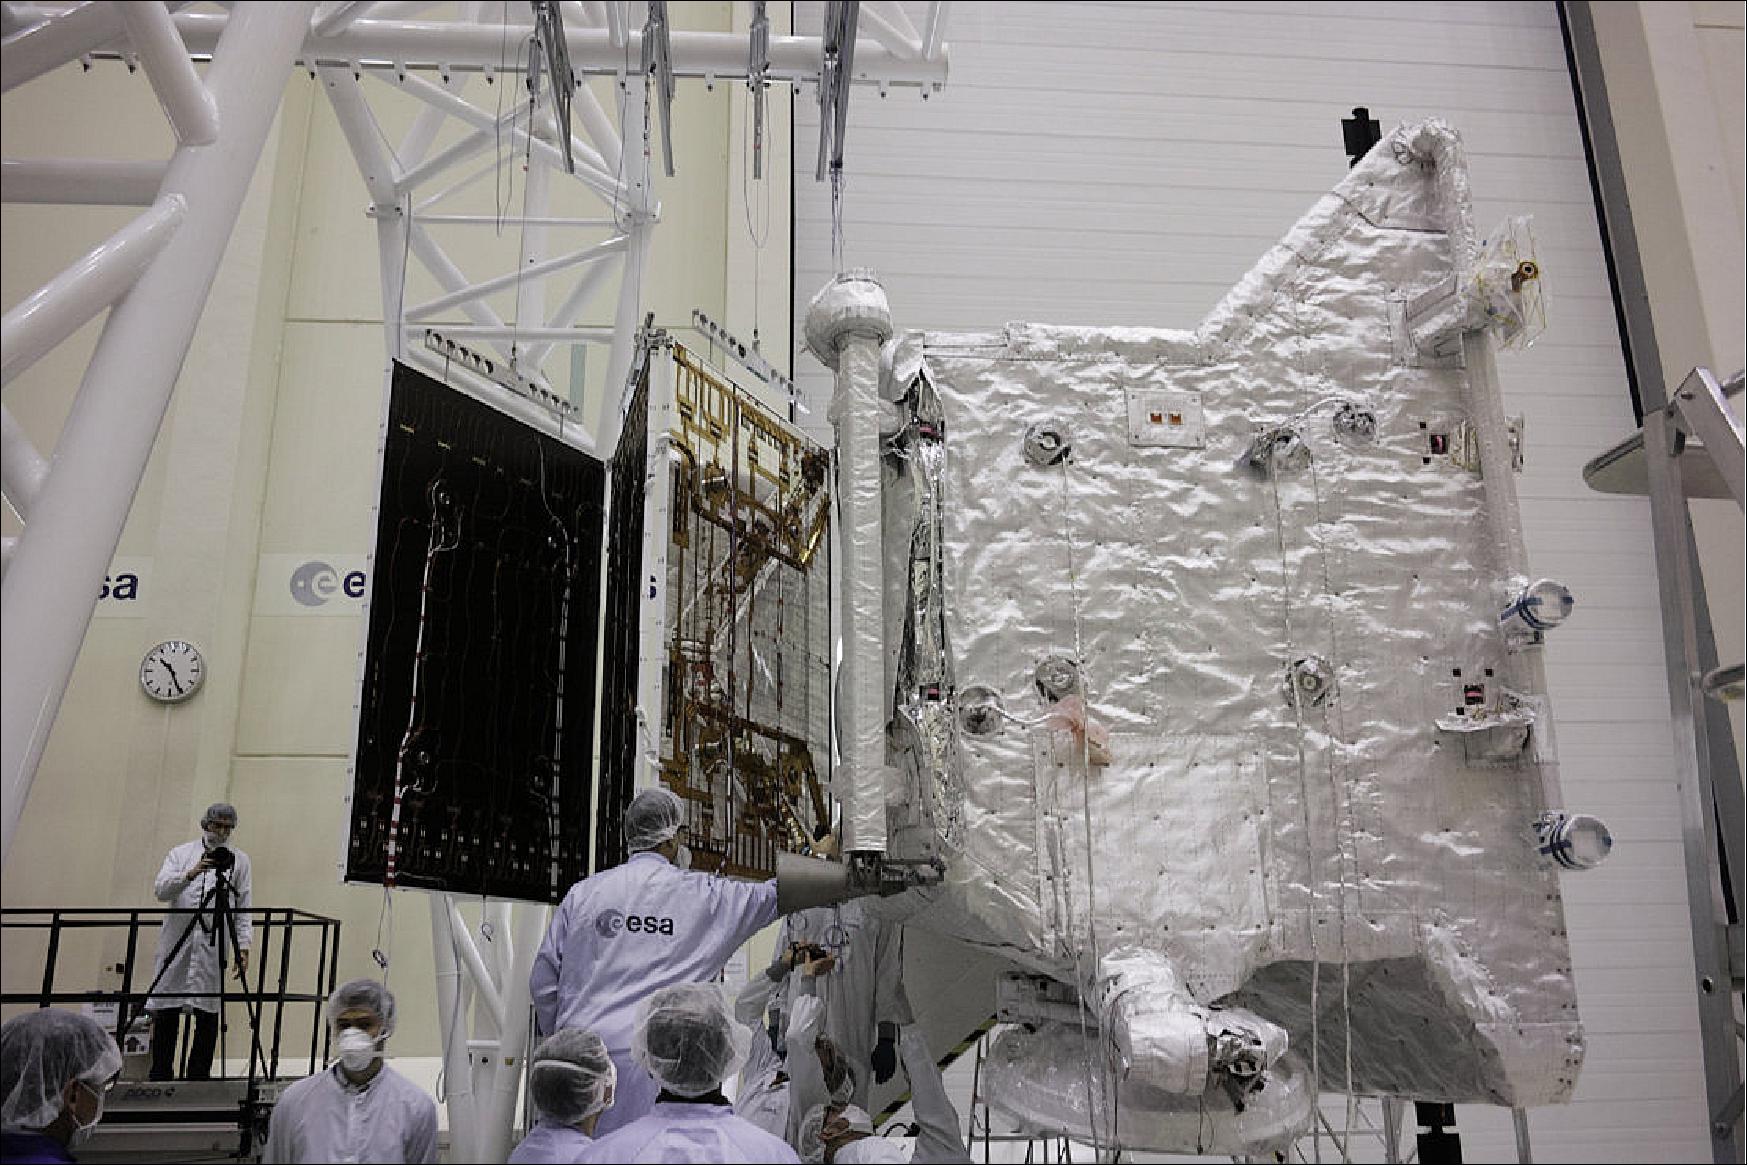 Figure 148: ESA's MPO (Mercury Planetary Orbiter) first saw the 7.5 m long three-panel solar wing being attached, and then unfurled. This was the first time the array had been deployed while attached to the orbiter. The panels were held from above to simulate the weightlessness of space (image credit: ESA)